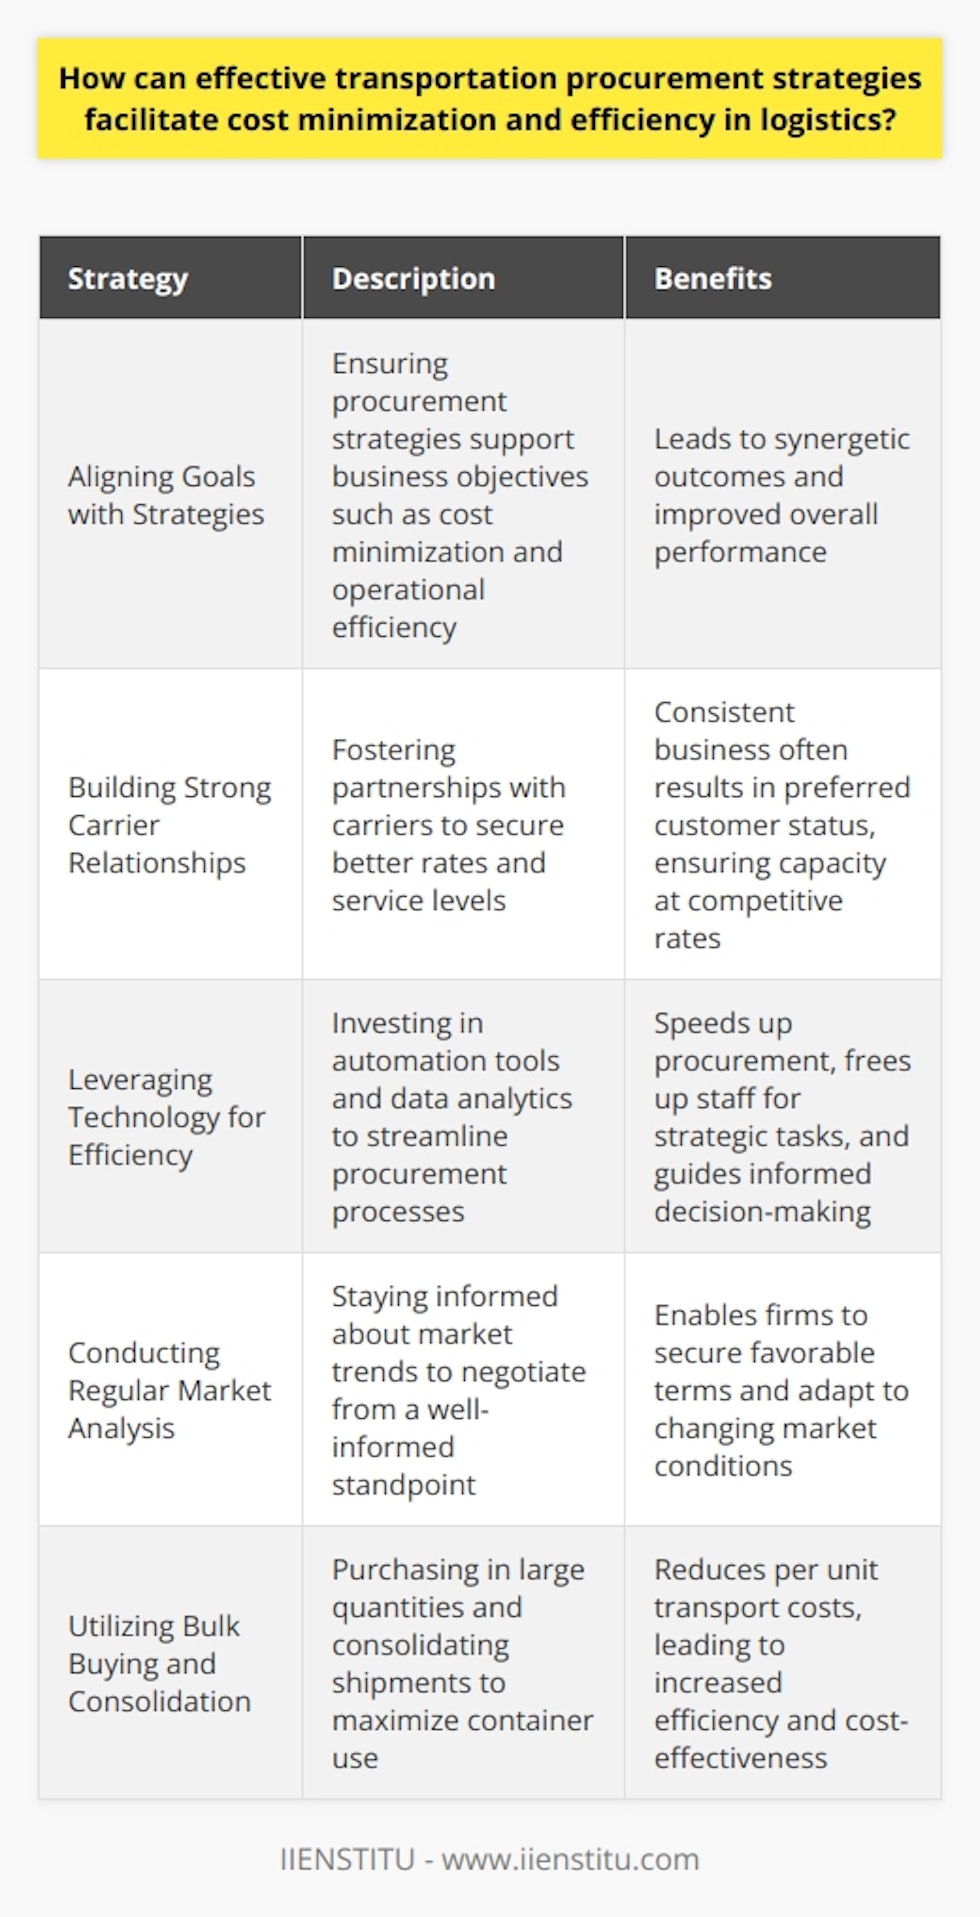 Effective Transportation Procurement Strategies Understanding Procurement in Logistics Procurement in logistics entails purchasing transportation services. These services move goods from origin to destination. Companies aim to minimize costs. They also strive for operational efficiency. Achieving these goals requires smart strategies. These strategies focus on cost control and value. Aligning Goals with Strategies Firms must align procurement strategies with business goals. Cost minimization is a common goal. Efficiency drives competitiveness. Strategies ensure logistic activities support these goals. Proper alignment leads to synergetic outcomes. Building Strong Carrier Relationships Fostering partnerships  with carriers is essential. Strong relationships lead to better rates and service levels. Consistent business often results in preferred customer status. This preference can secure capacity at competitive rates. Leveraging Technology for Efficiency Investing in technologies  enables better procurement processes. Automation tools speed up procurement. They free up staff for strategic tasks. Data analytics predicts cost trends. It guides informed decision-making. Conducting Regular Market Analysis Regular market analysis keeps companies informed. Knowledge of market trends is pivotal. It enables negotiation from a well-informed standpoint. Firms can then secure favorable terms. Embracing Flexible Transportation Options Flexibility in transportation options is key. Utilizing a mix of transportation modes can cut costs. It also ensures timely deliveries. Balancing cost with service level is essential. Implementing Strong Negotiation Tactics Effective negotiation skills secure better contracts. Negotiators must understand market dynamics. They should also grasp service-level requirements. Equipped with these, they can achieve favorable terms. Utilizing Bulk Buying and Consolidation Bulk buying often leads to lower costs. Consolidation of shipments maximizes container use. It reduces per unit transport costs. This approach is efficient and cost-effective. Analyzing Total Cost of Ownership Consideration of the total cost of ownership is crucial. This analysis transcends the purchase price. It includes delivery, service, and maintenance costs. Firms can make better procurement decisions. Regular Reviews and Adjustments Adaptability ensures long-term success. Regularly reviewing and adjusting strategies is paramount. Supply chain dynamics change rapidly. Companies must adapt swiftly to sustain efficiency. Effective transportation procurement strategies mix several tactics. Alignment, relationships, technology, and flexibility matter. Negotiation, consolidation, and total cost analysis are also vital. Regular reviews and adjustments keep strategies relevant. These elements work together. They foster cost minimization and efficiency in logistics.